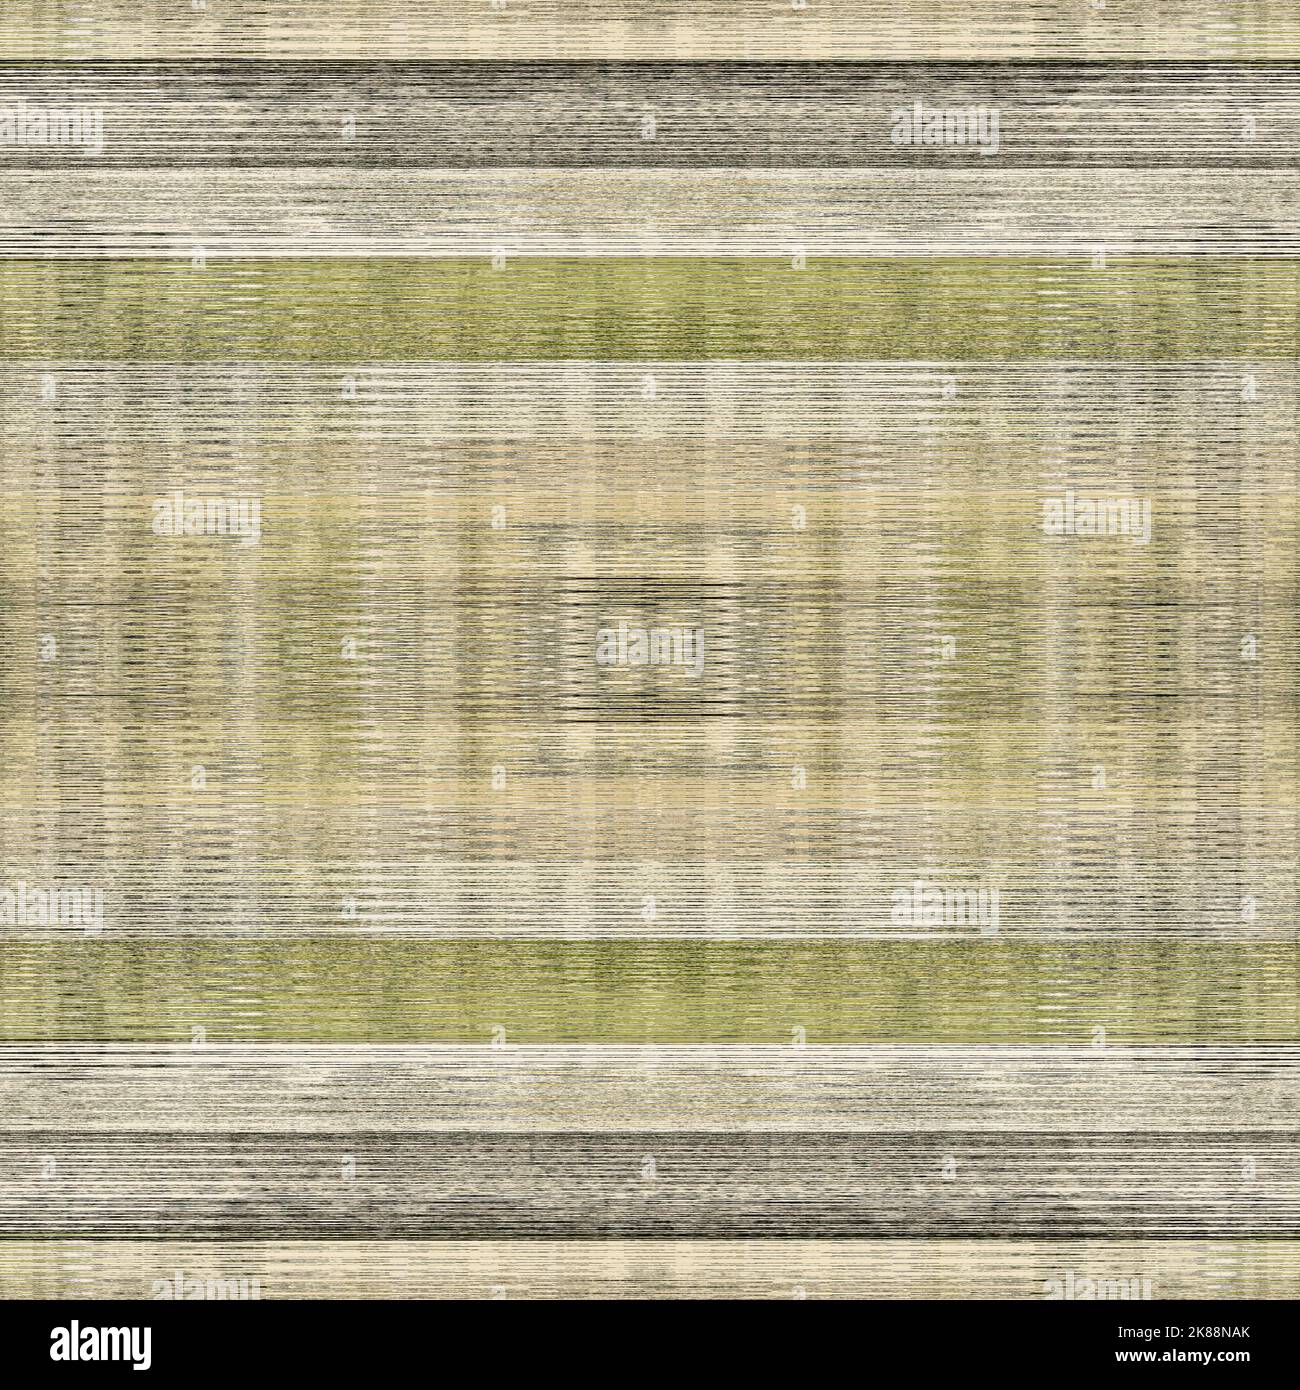 Green forest marl seamless pattern. Textured woodland weave for